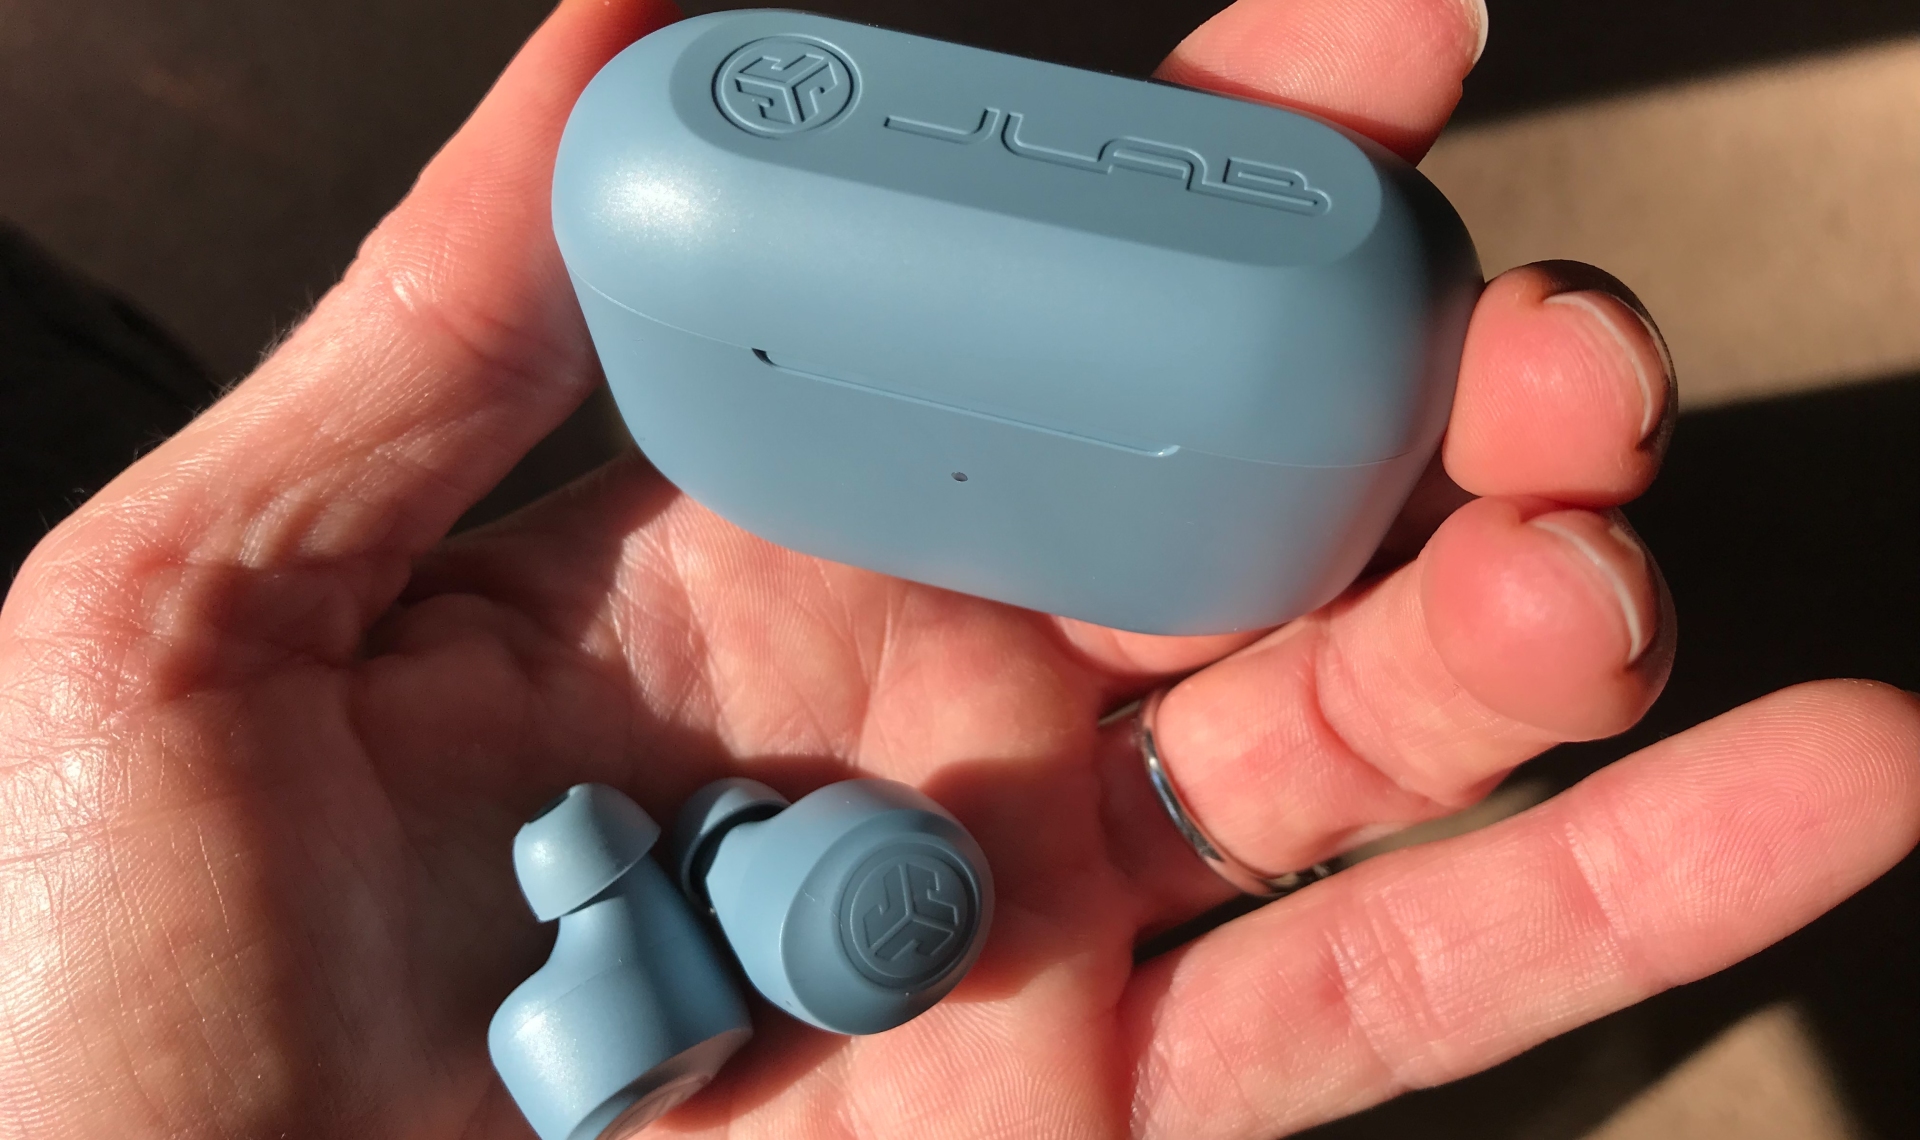 JLab Go Air Pop earbuds and case in a hand